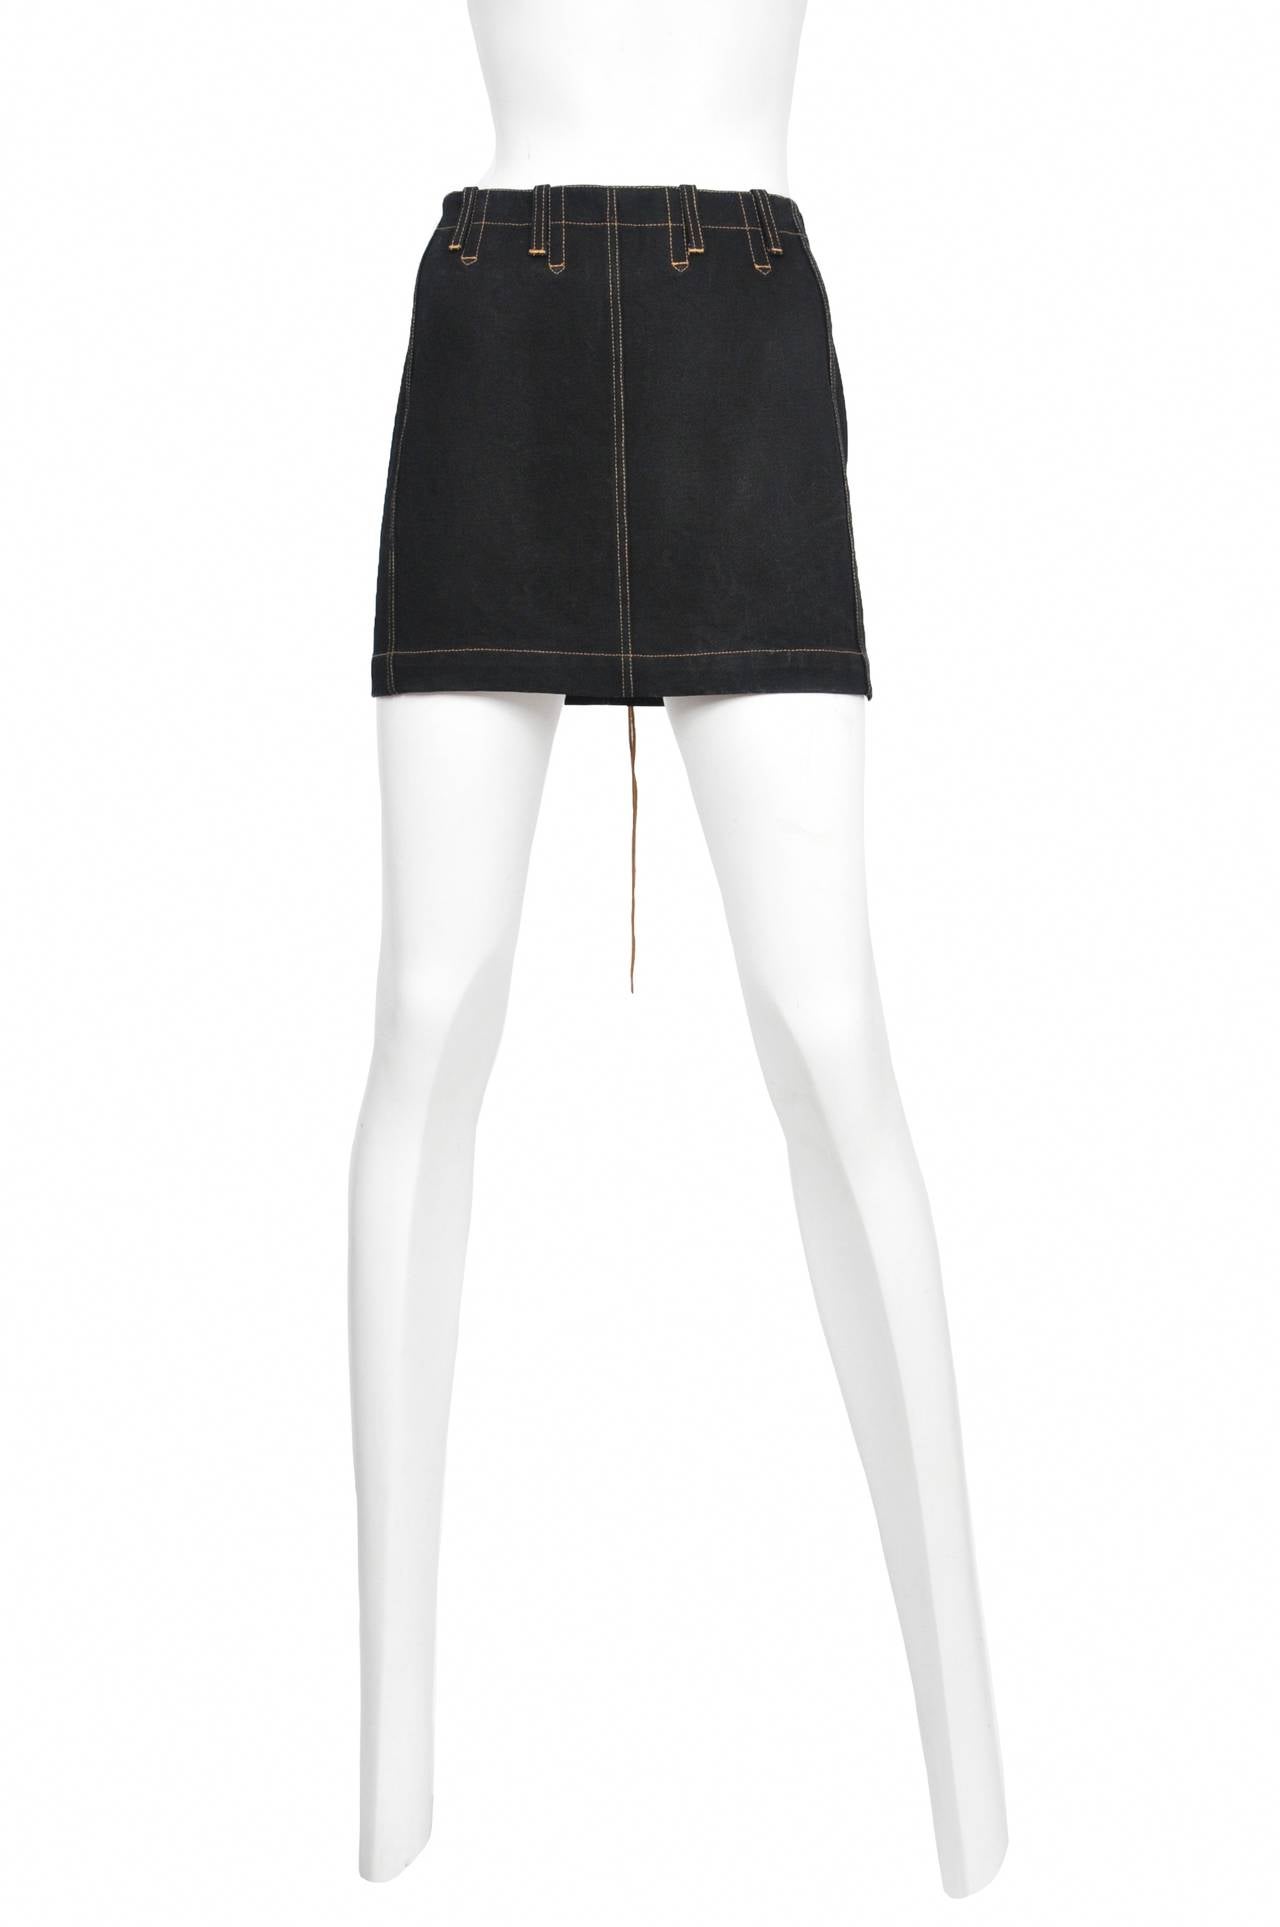 Vintage Azzedine Alaia denim mini skirt featuring stitching details and a lace up back